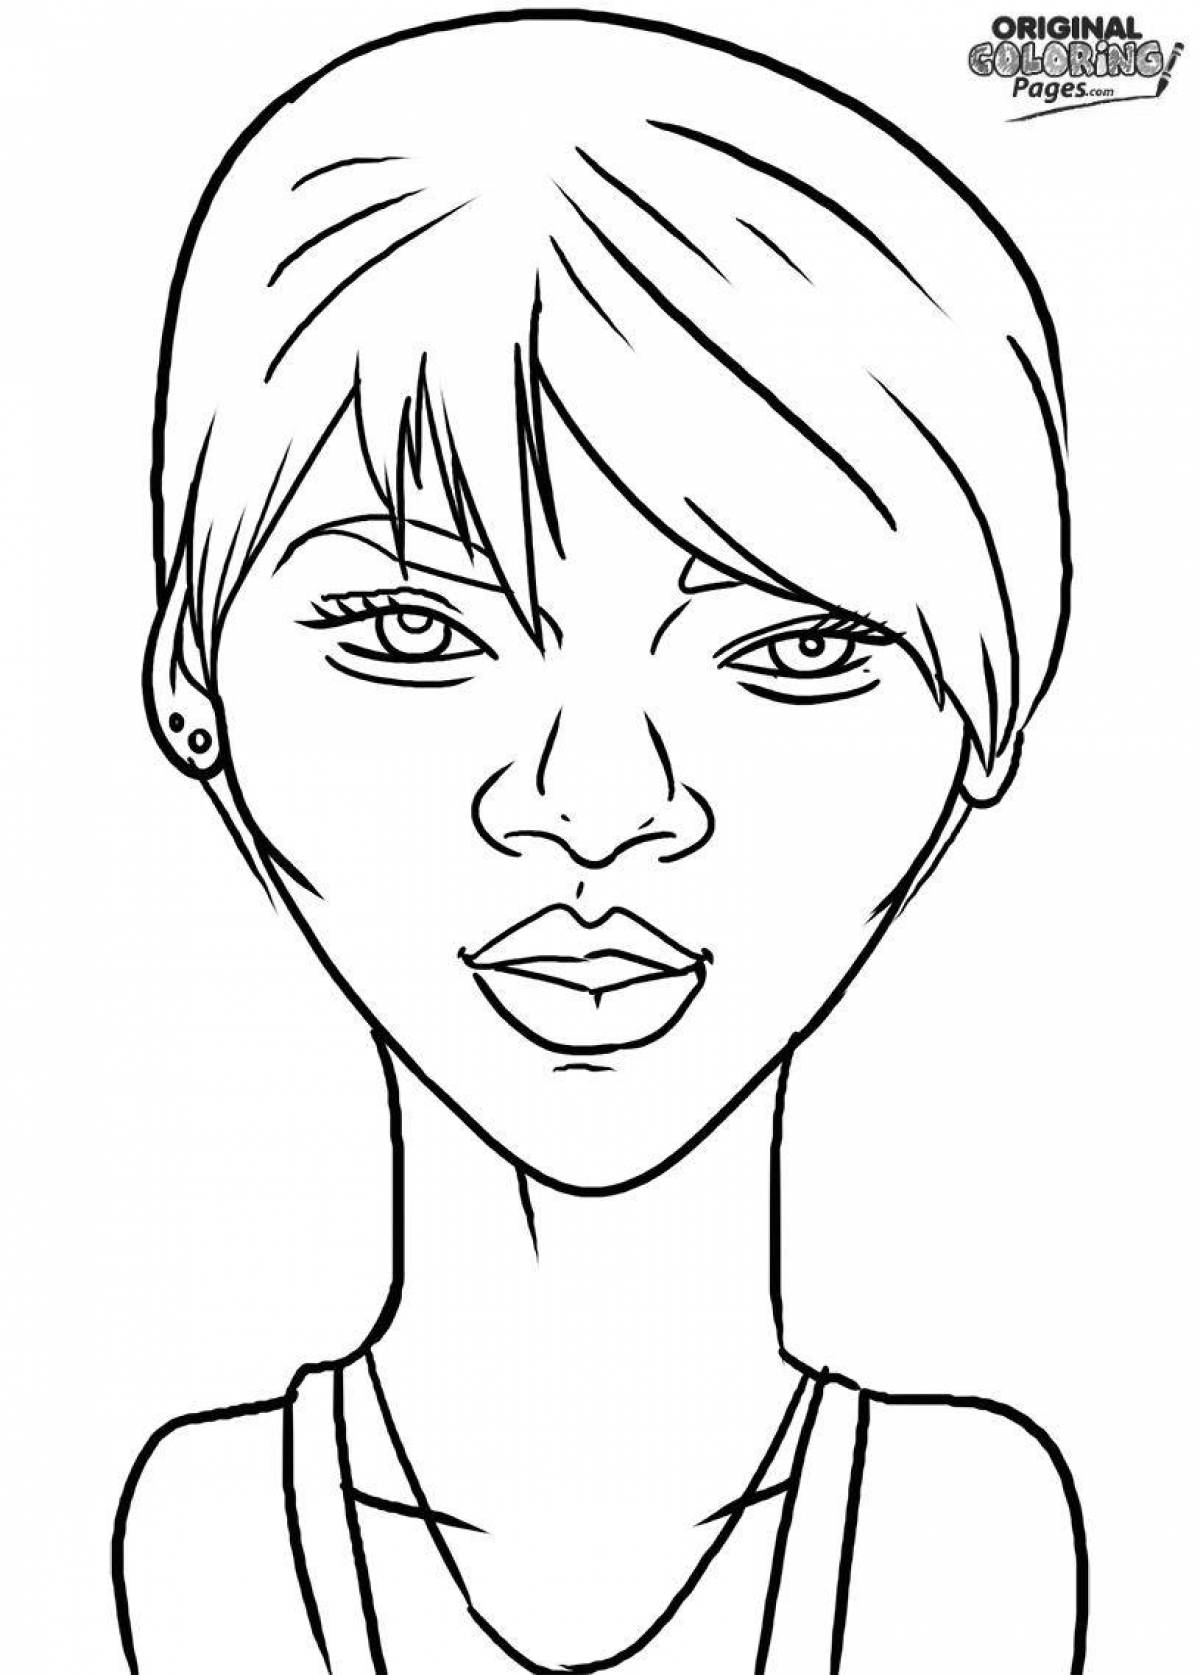 Rihanna's glowing coloring page